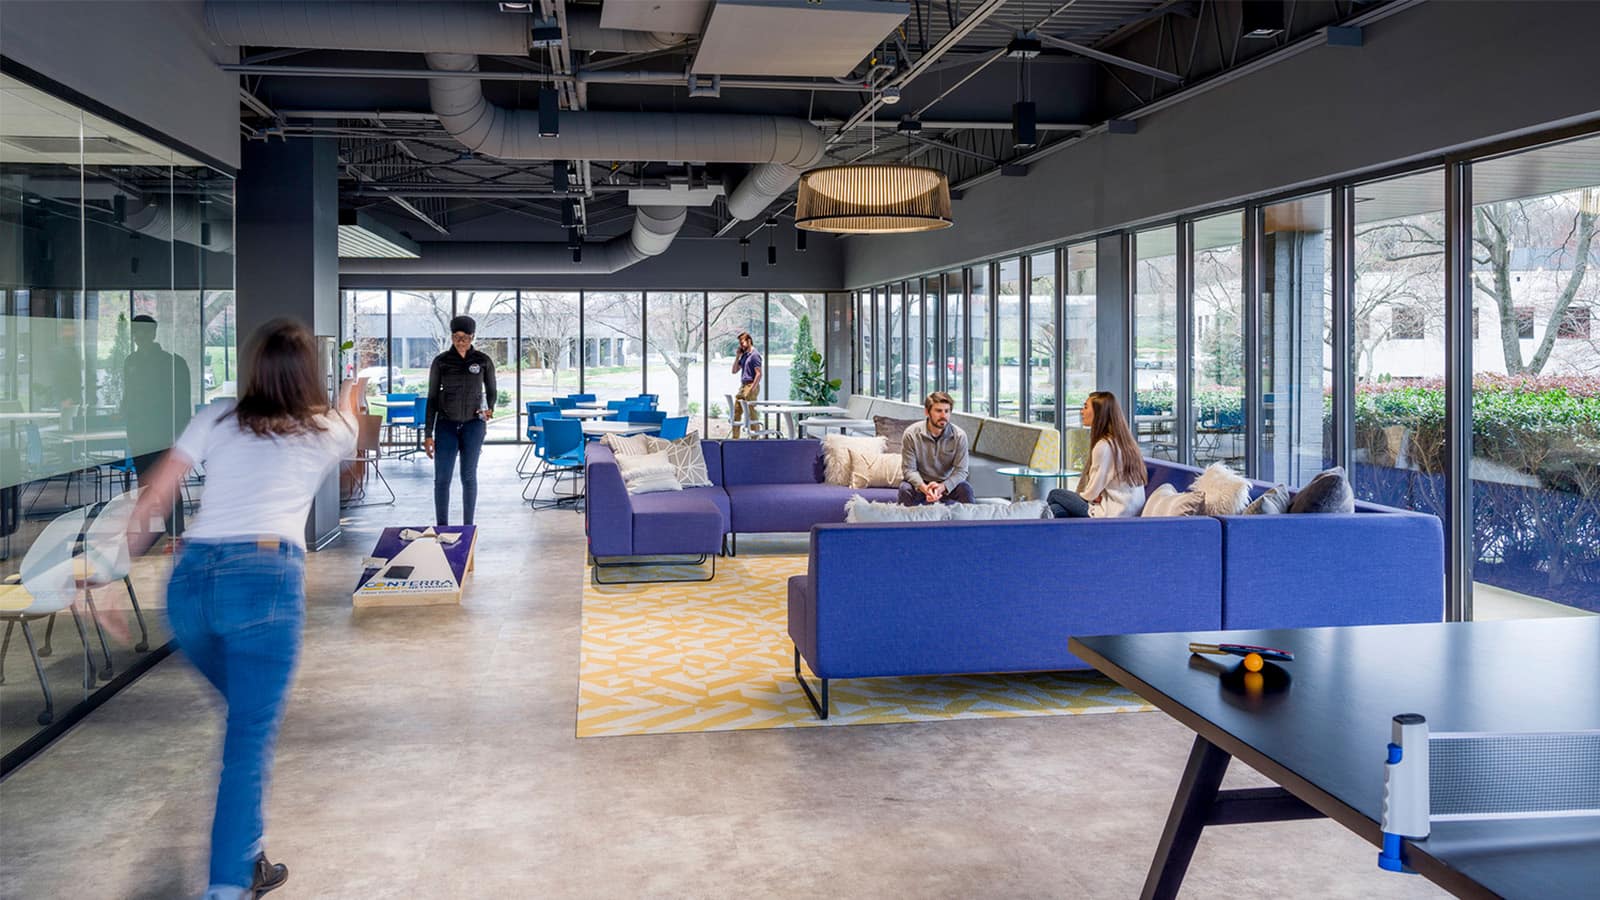 Open meeting and dining space at Conterra Networks' headquarters